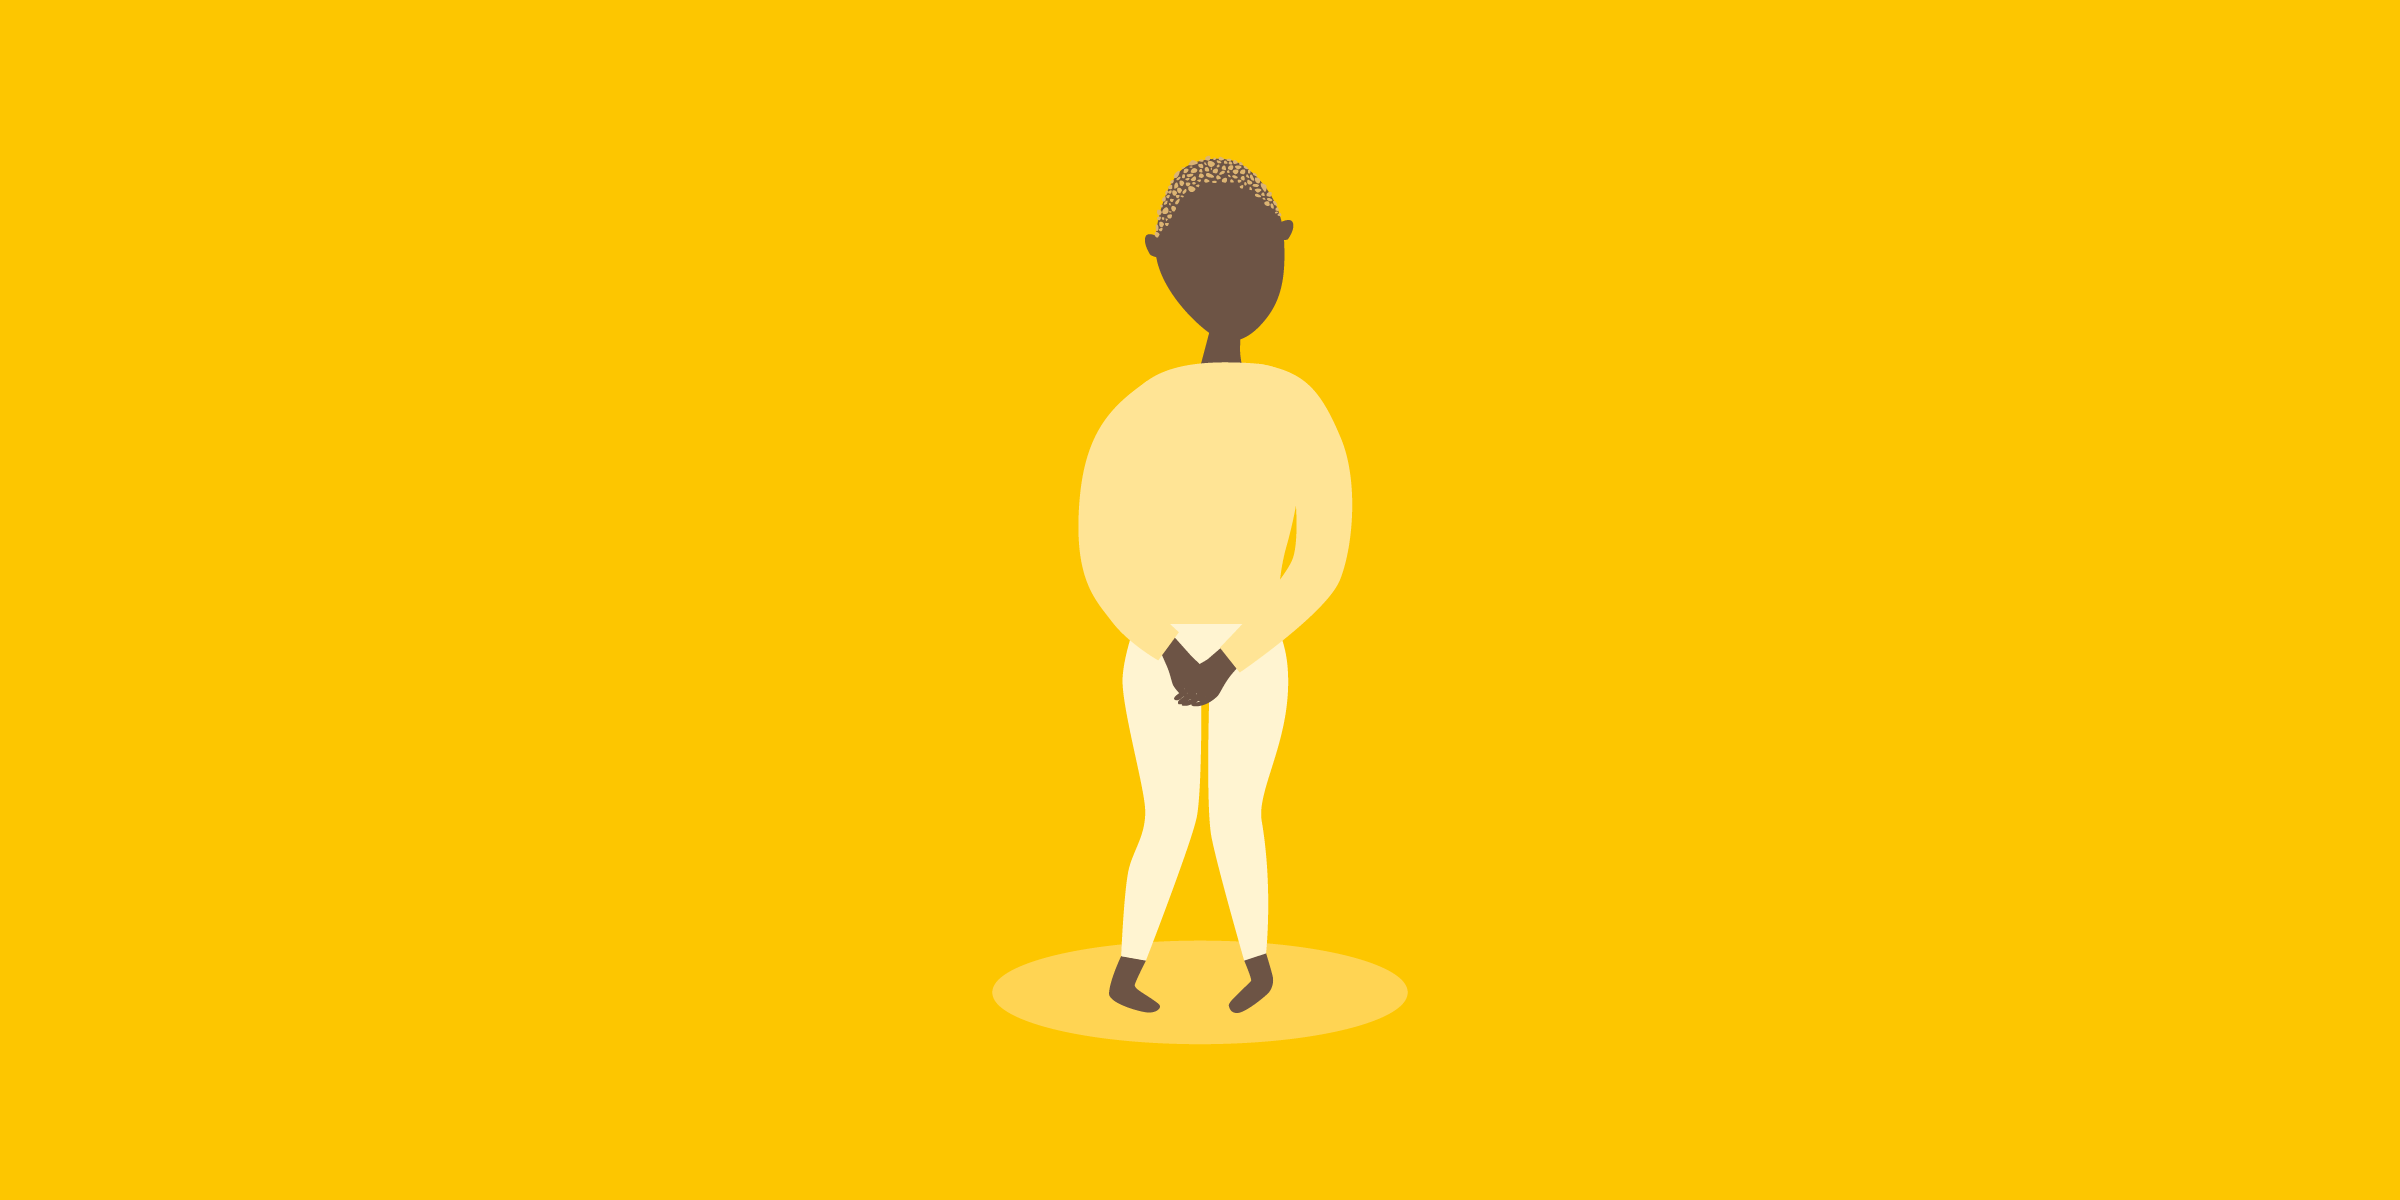 Person holding pants, in yellow shades on a yellow background